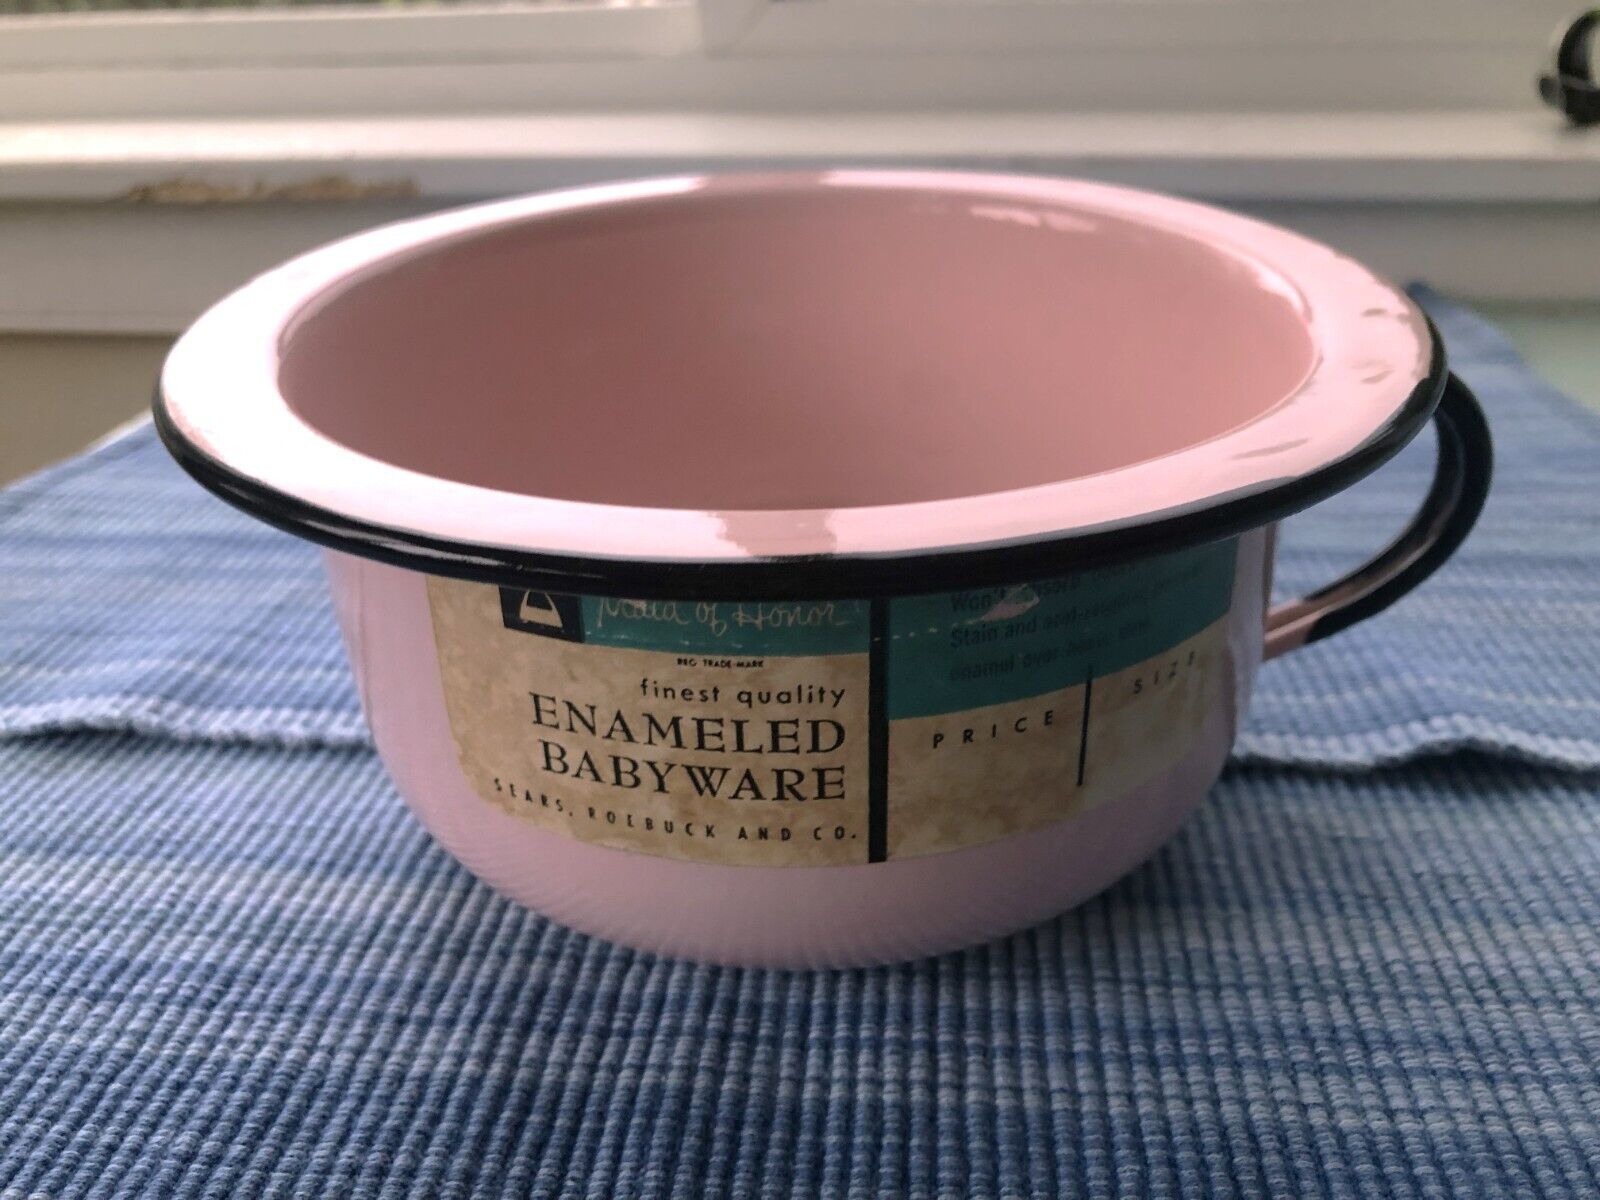 VINTAGE Maid of Honor ENAMELED Babyware Pot Pink Sears Roebuck And Co.